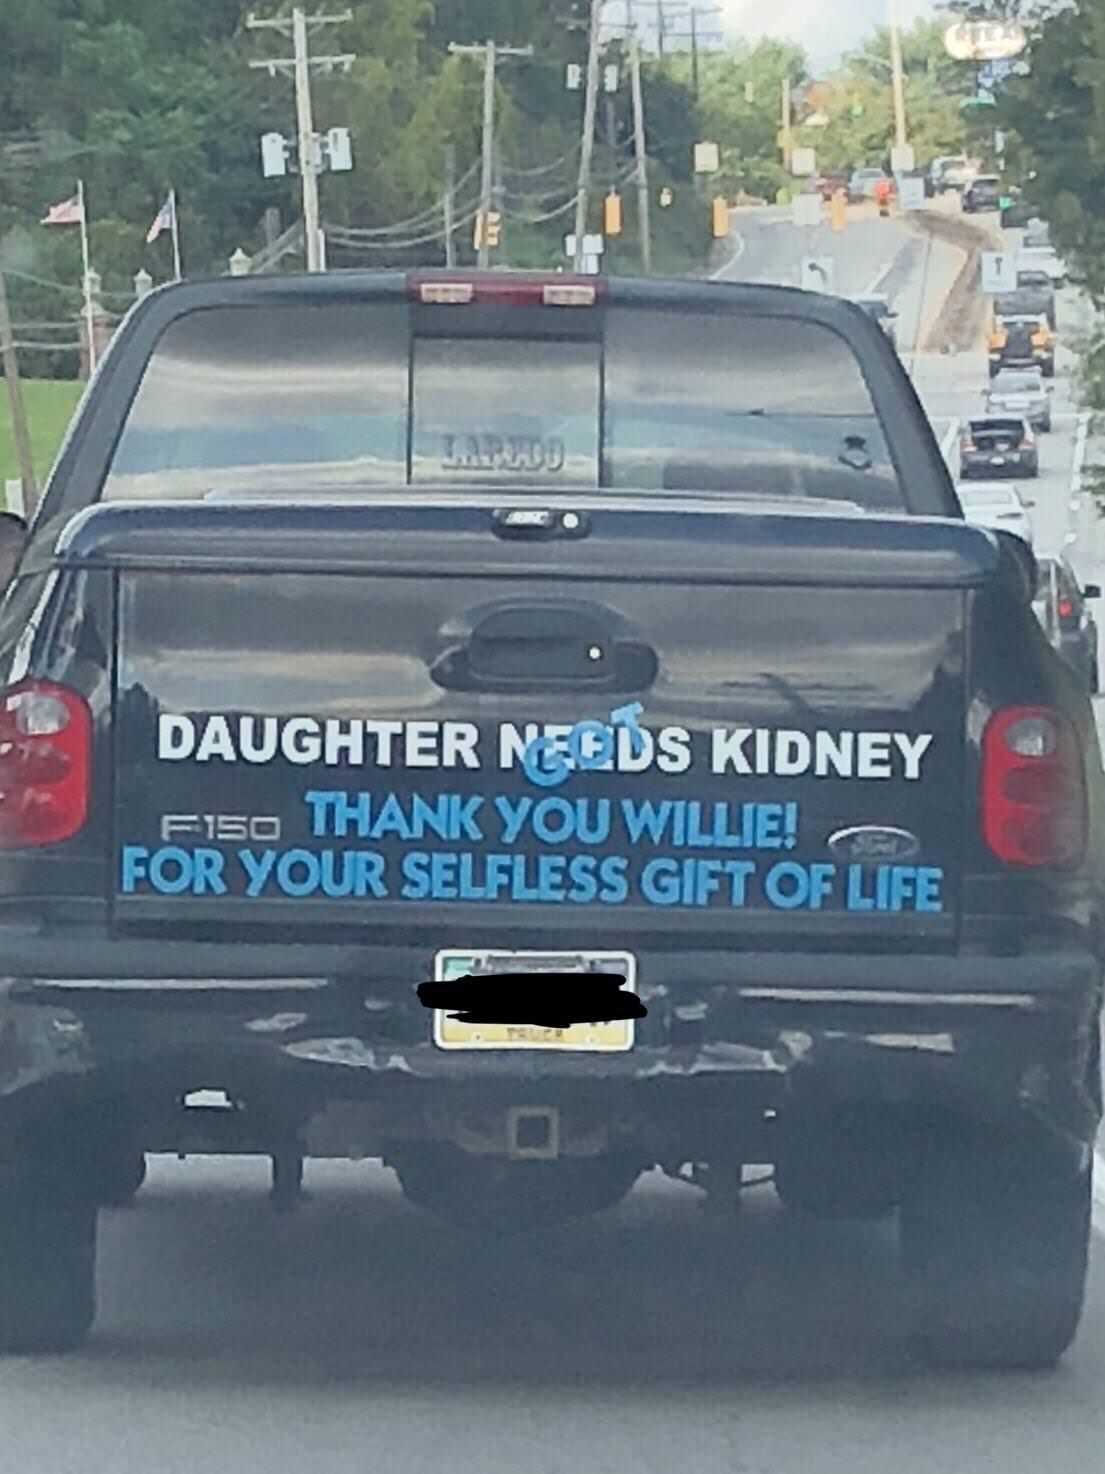 f150 meme - Daughter Needs Kidney F150 Thank You Willie! For Your Selfless Gift Of Life